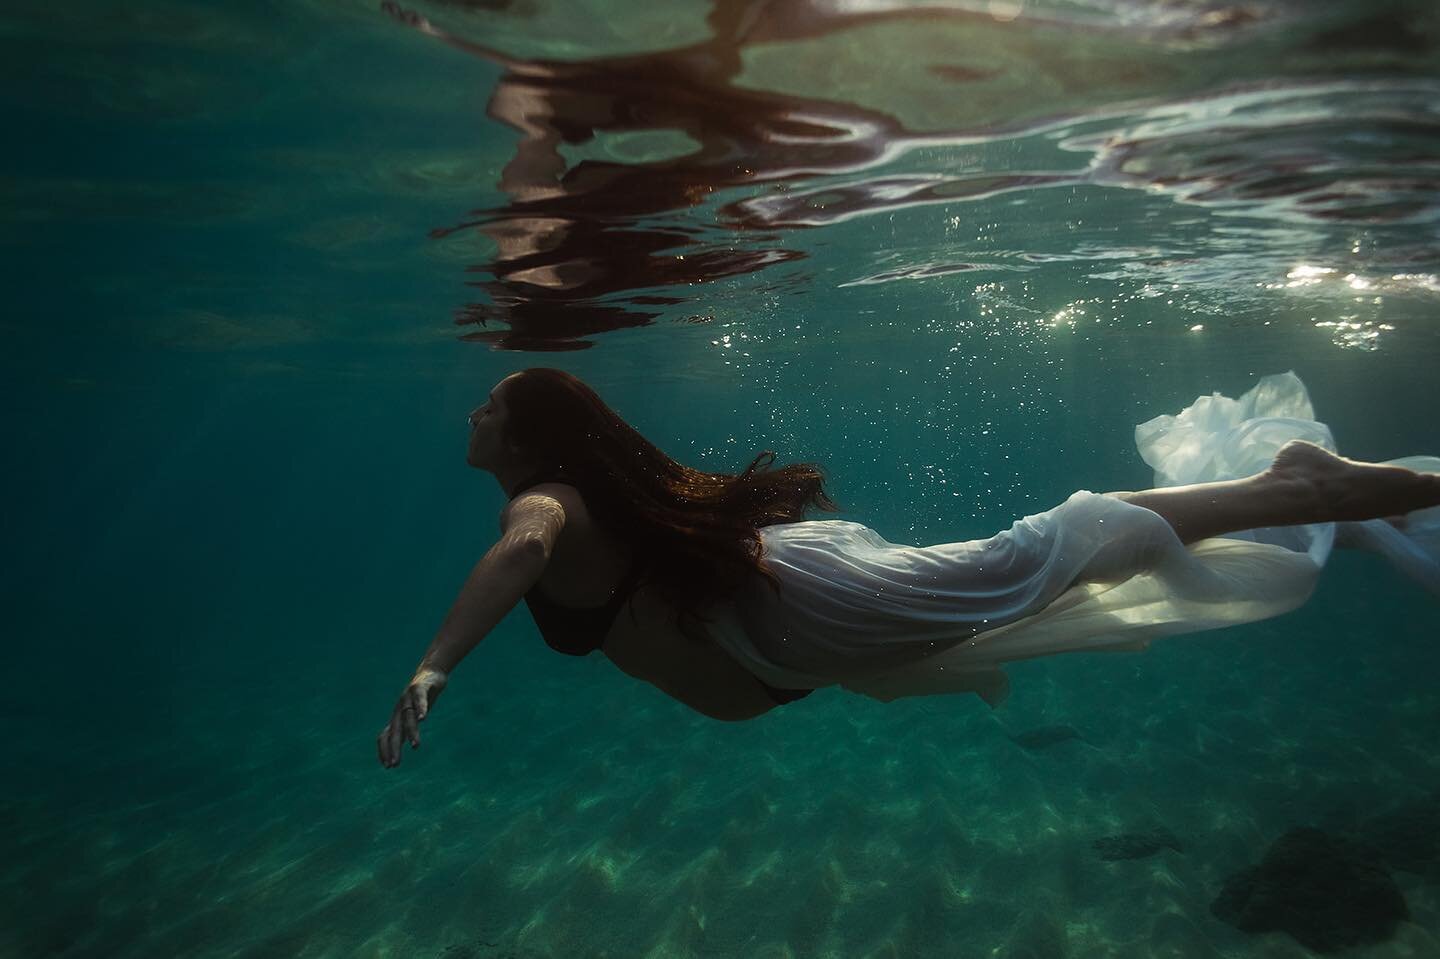 Now offering hybrid sessions, best of both worlds above and below the sea. 
.
.
.
.
#maternity #grossesse #ajaccio #corse #corsephotographe #corsica #corsicaphotographer #underwater #lookslikefilm